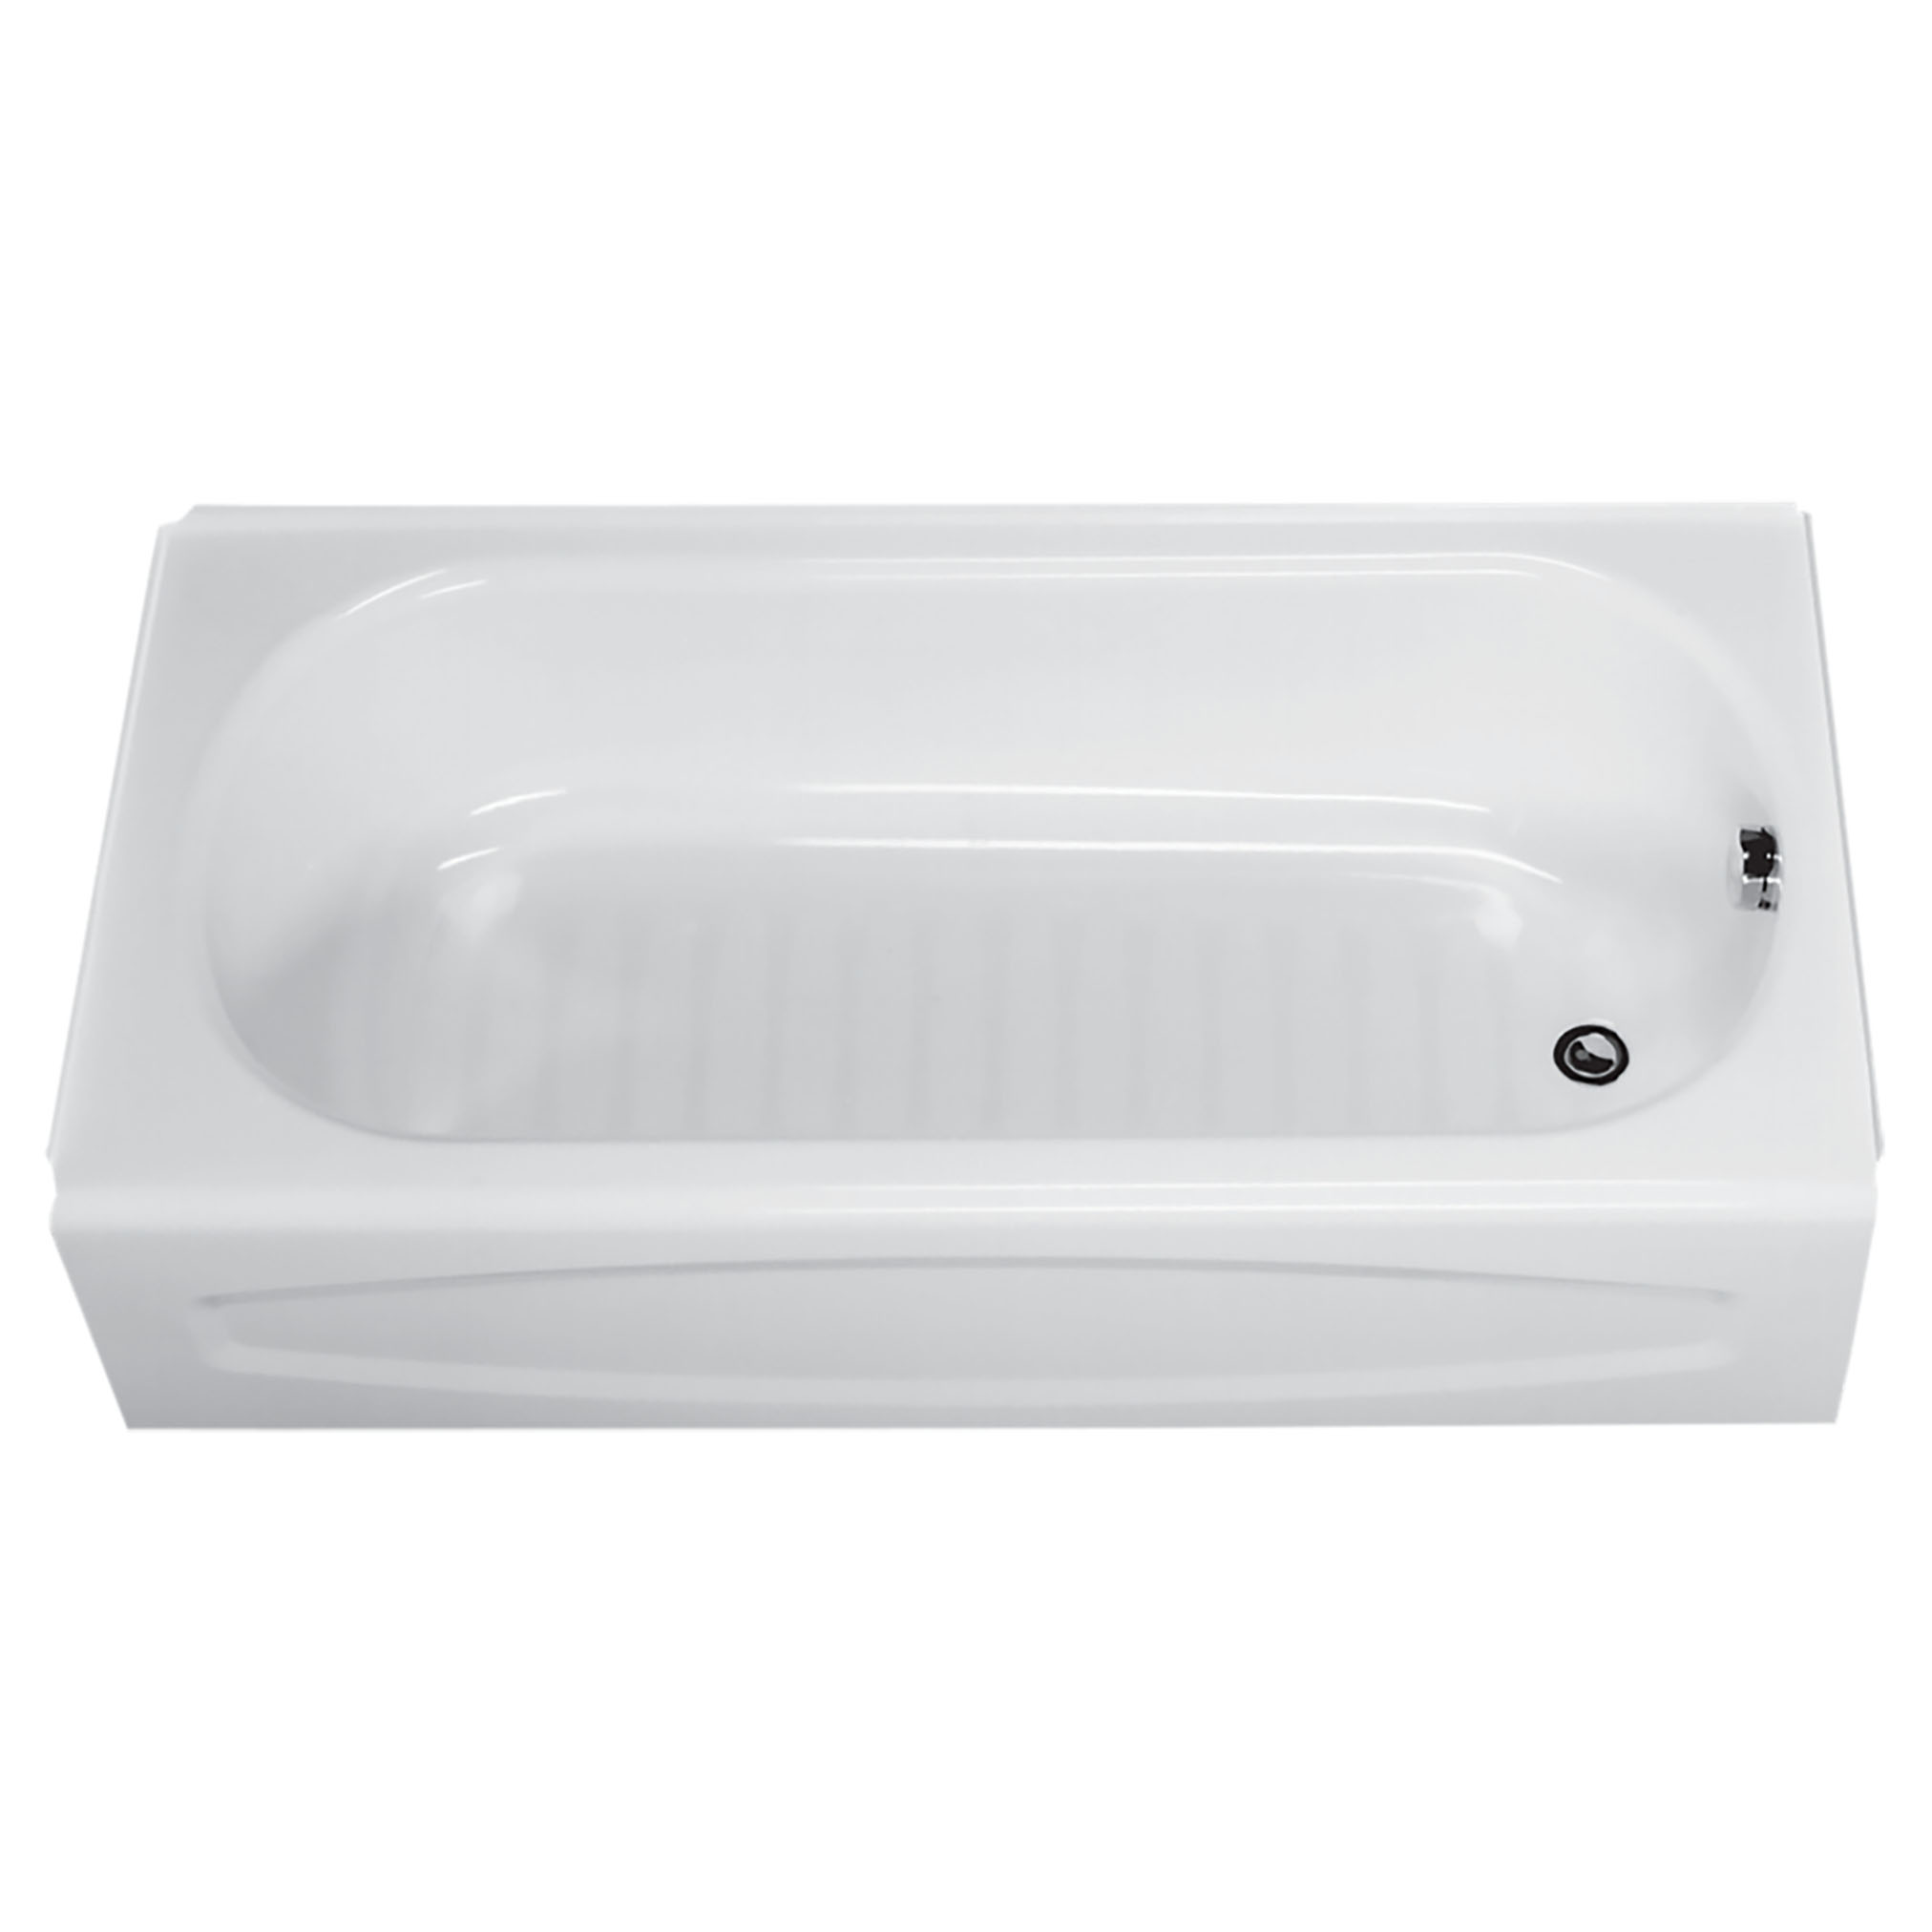 New Solar® 60 x 30-Inch Integral Apron Bathtub Above Floor Rough With Right-Hand Outlet